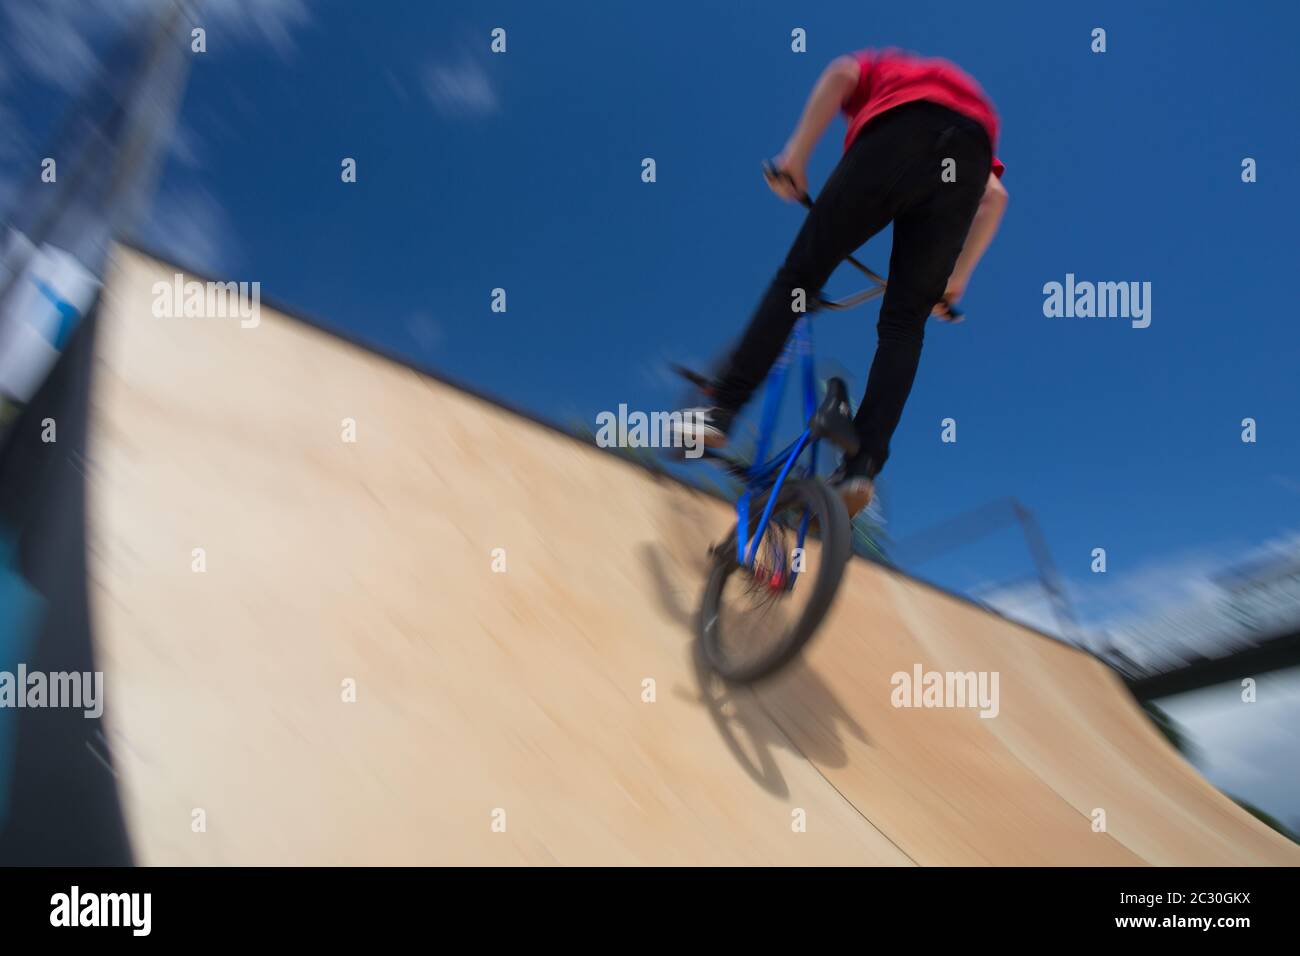 Bmx rider jumping over on a U ramp in a skatepark (motion blurred image) Stock Photo